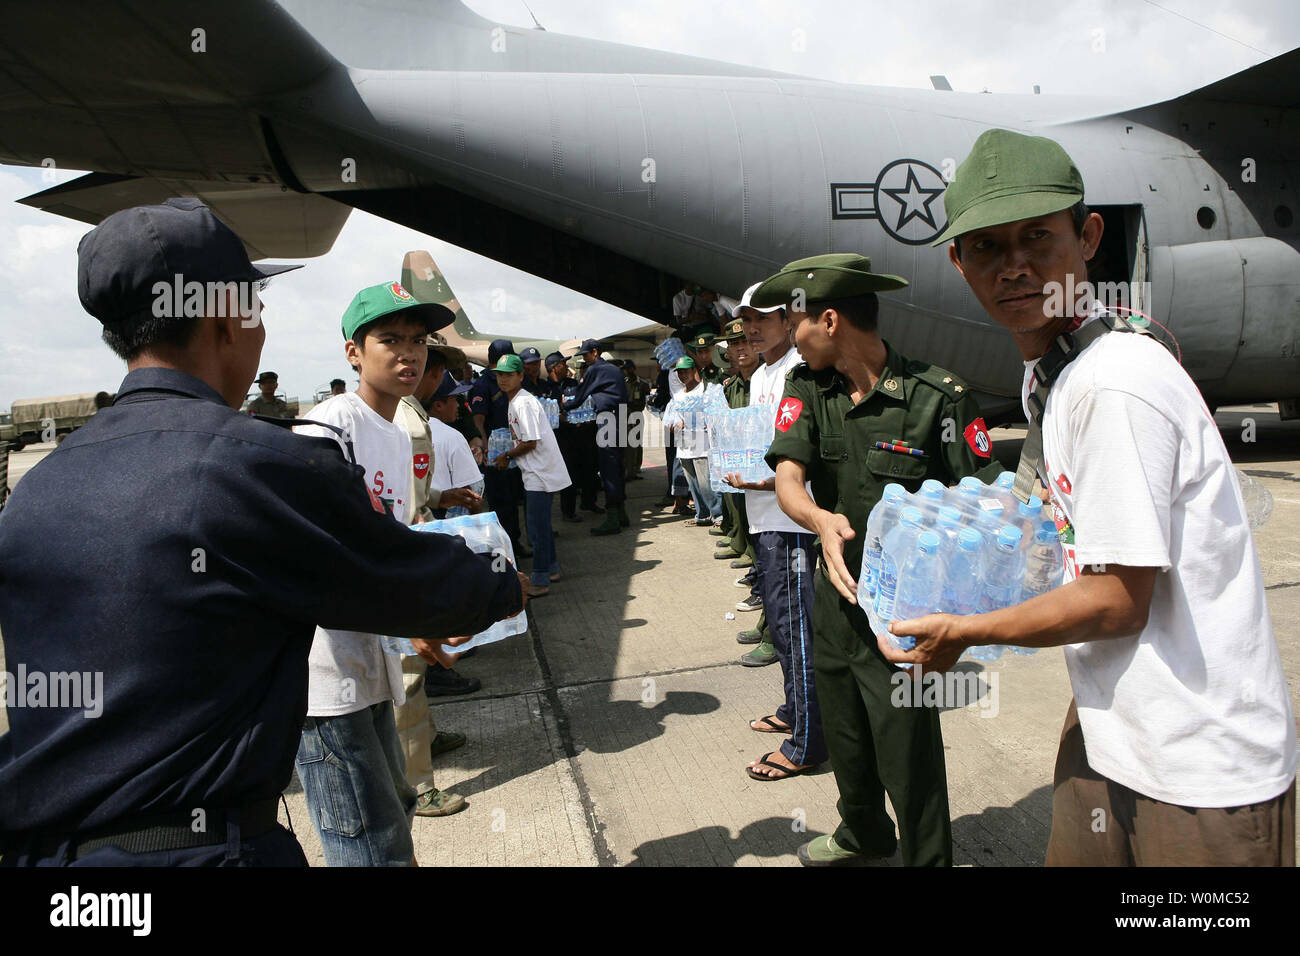 Burmese service members form a line to unload water supplies from a U.S. Air Force C-130 Hercules aircraft at Rangoon International Airport in Myanmar on May 12, 2008. The shipment of water, mosquito nets and blankets arrived on the first of three planned relief flights to provide aid to citizens devastated by Tropical Cyclone Nargis. (UPI Photo/Andres Alcaraz/U.S. Marine Corps) Stock Photo